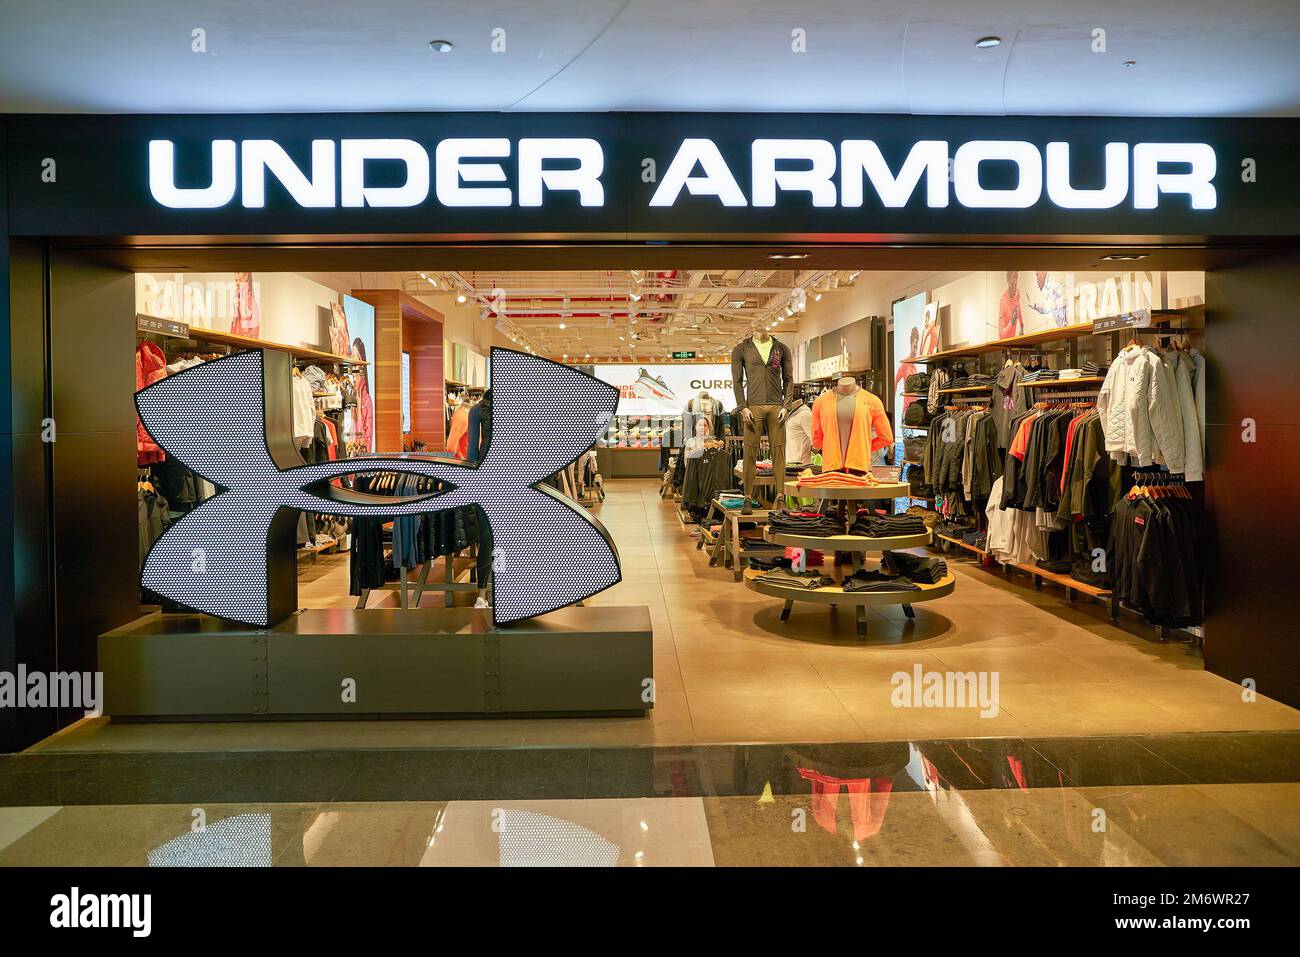 UNDER ARMOUR in China: Shop facade during a special sale, This Famous  American brand makes luxury fitness sports clothing, China 17 june 2019  Stock Photo - Alamy